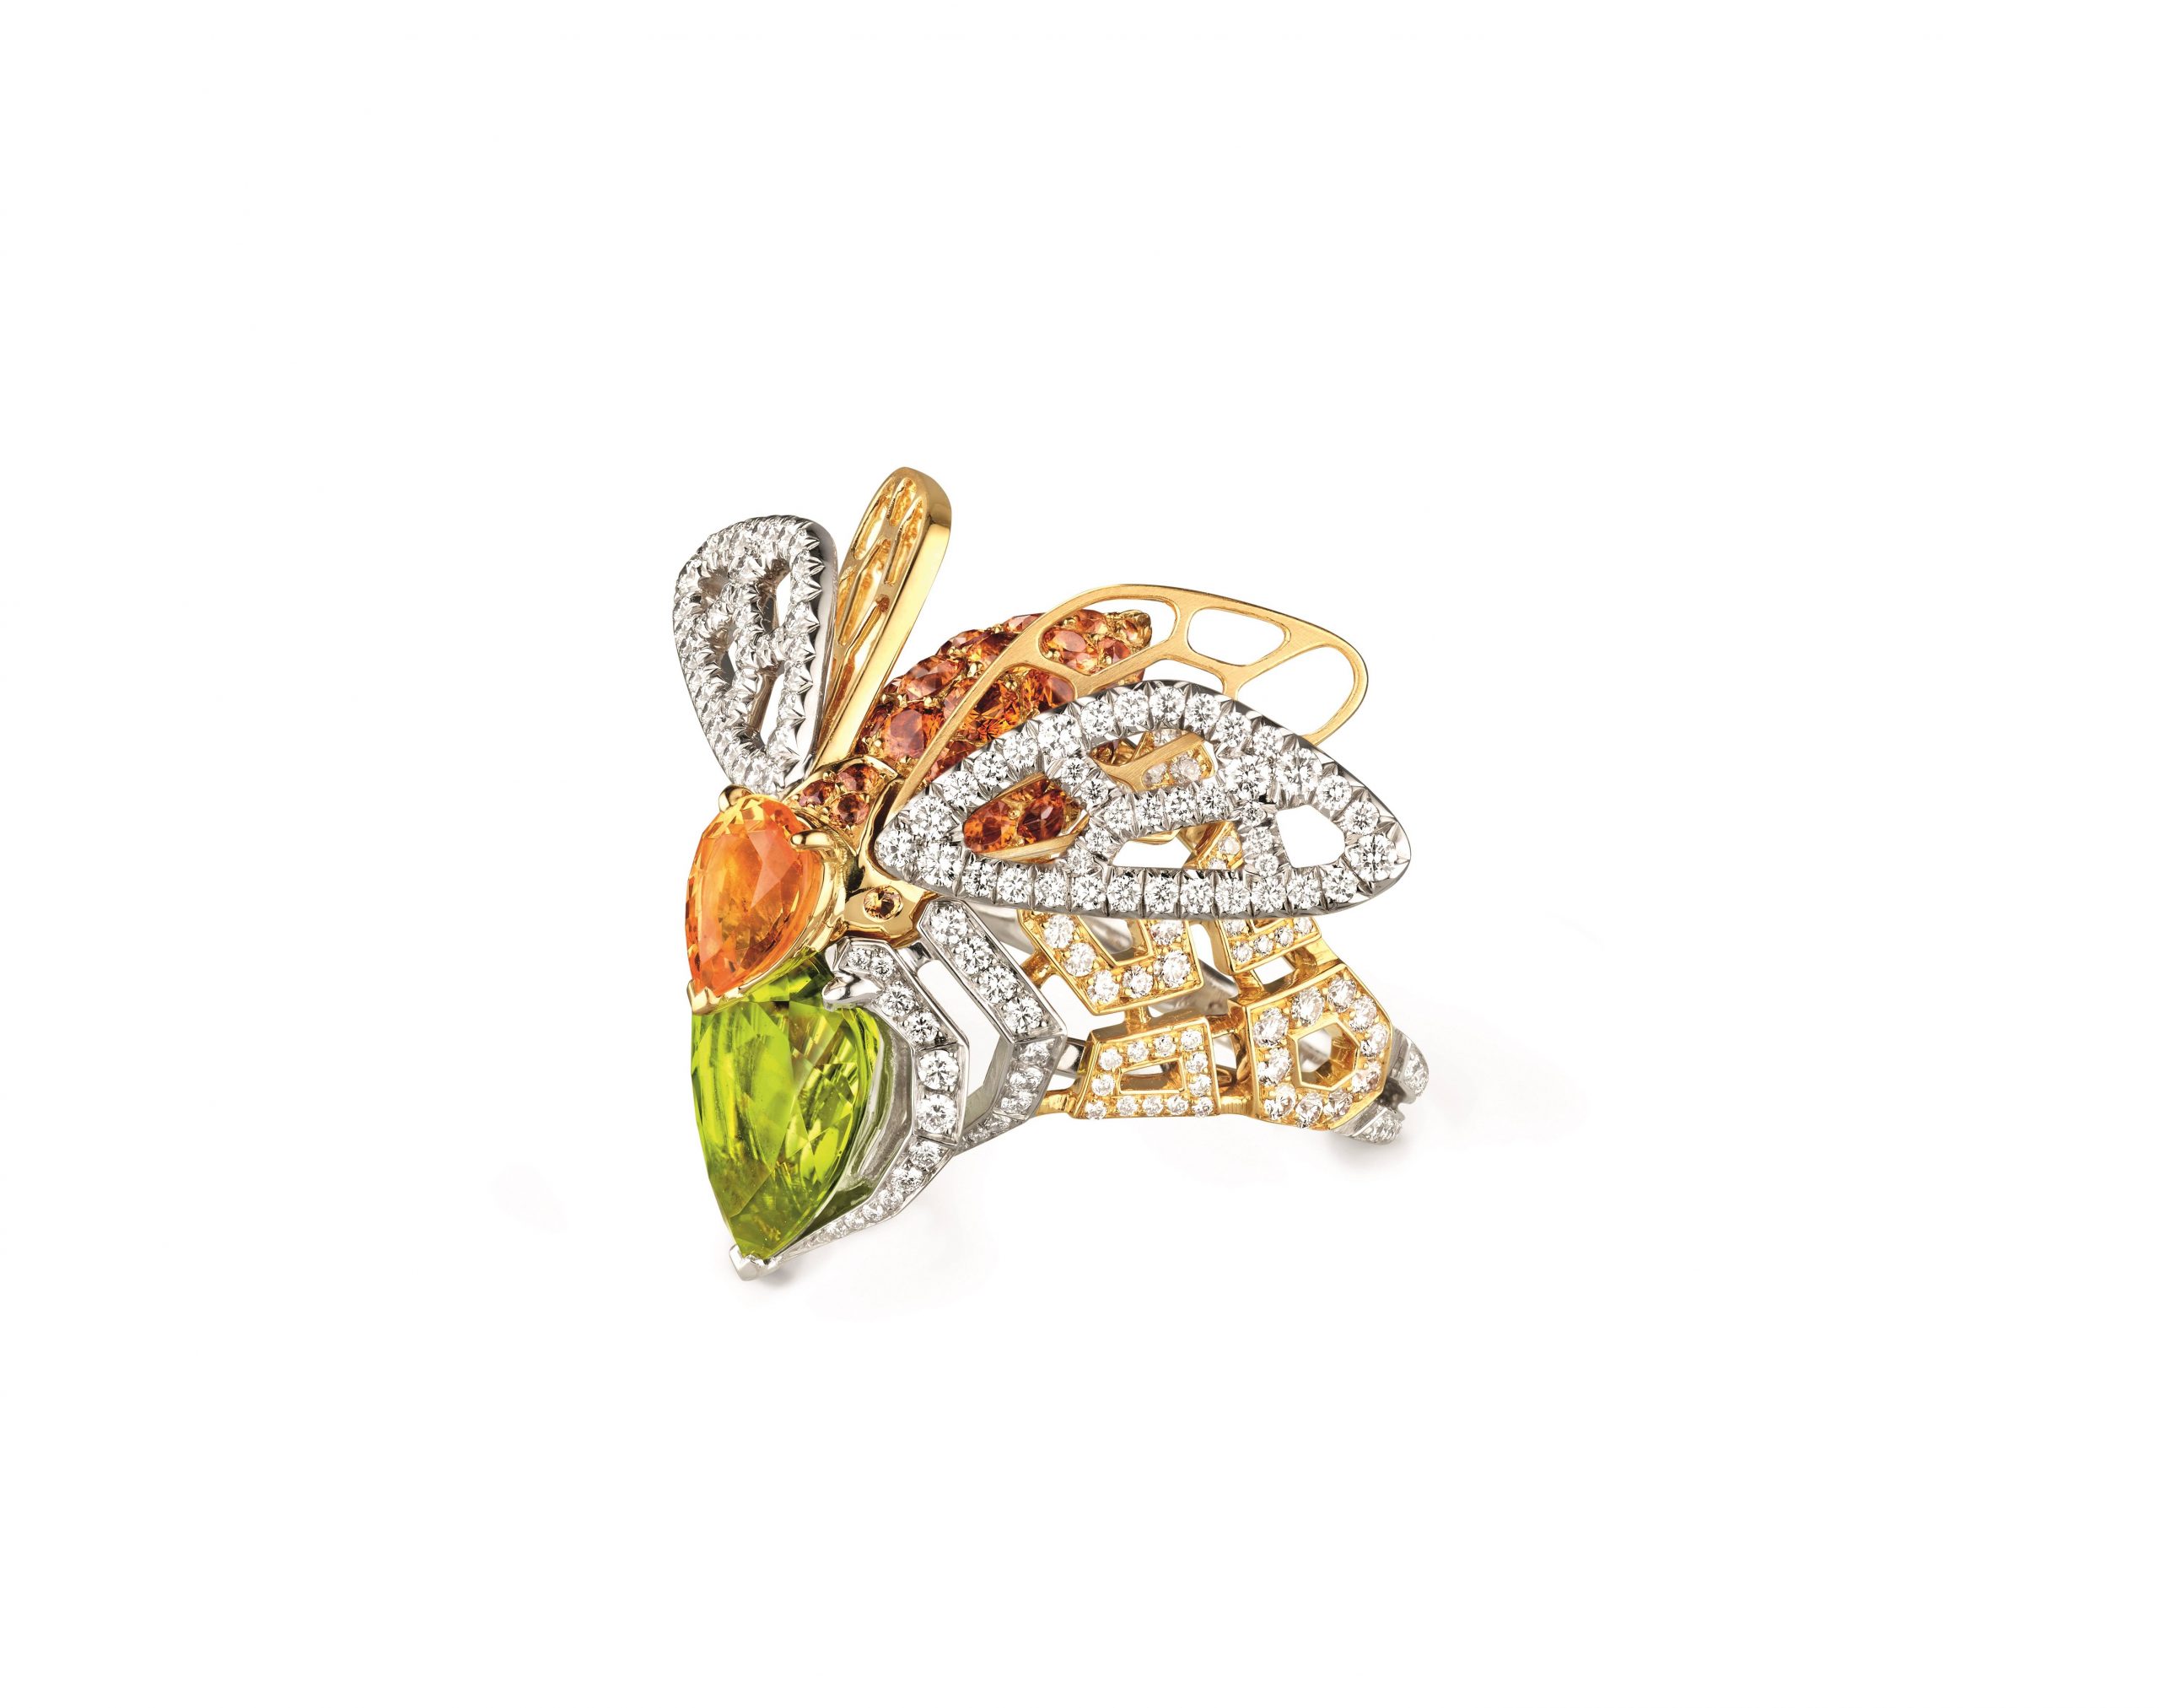 Haute Jewellery House Chaumet Creates A buzz In Paris With A “Bucolic Promenade” And A Tourbillon Bee